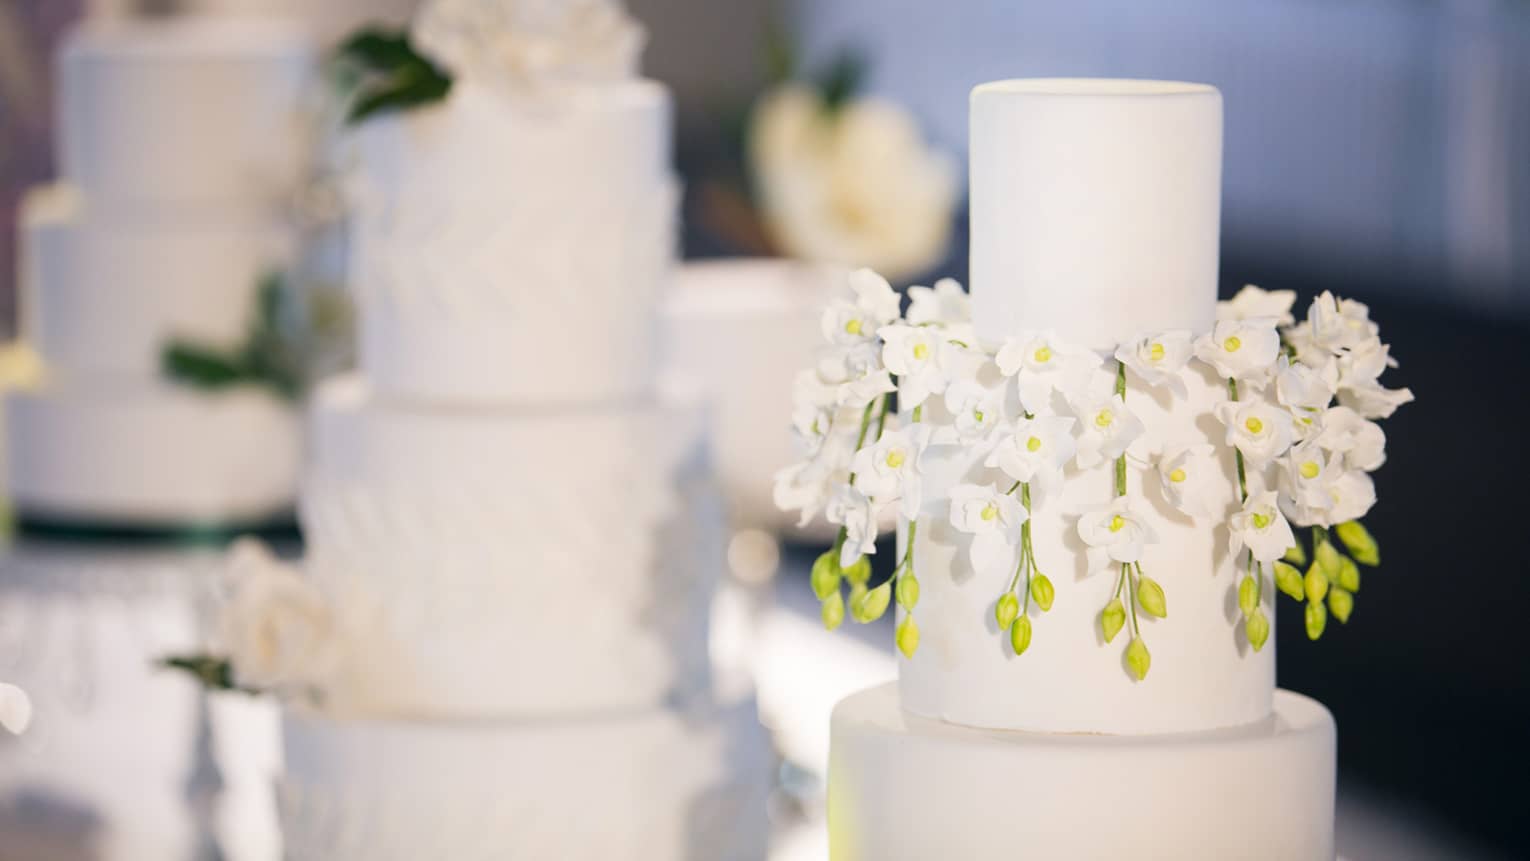 Three-tiered wedding cakes are each garnished with white florals 